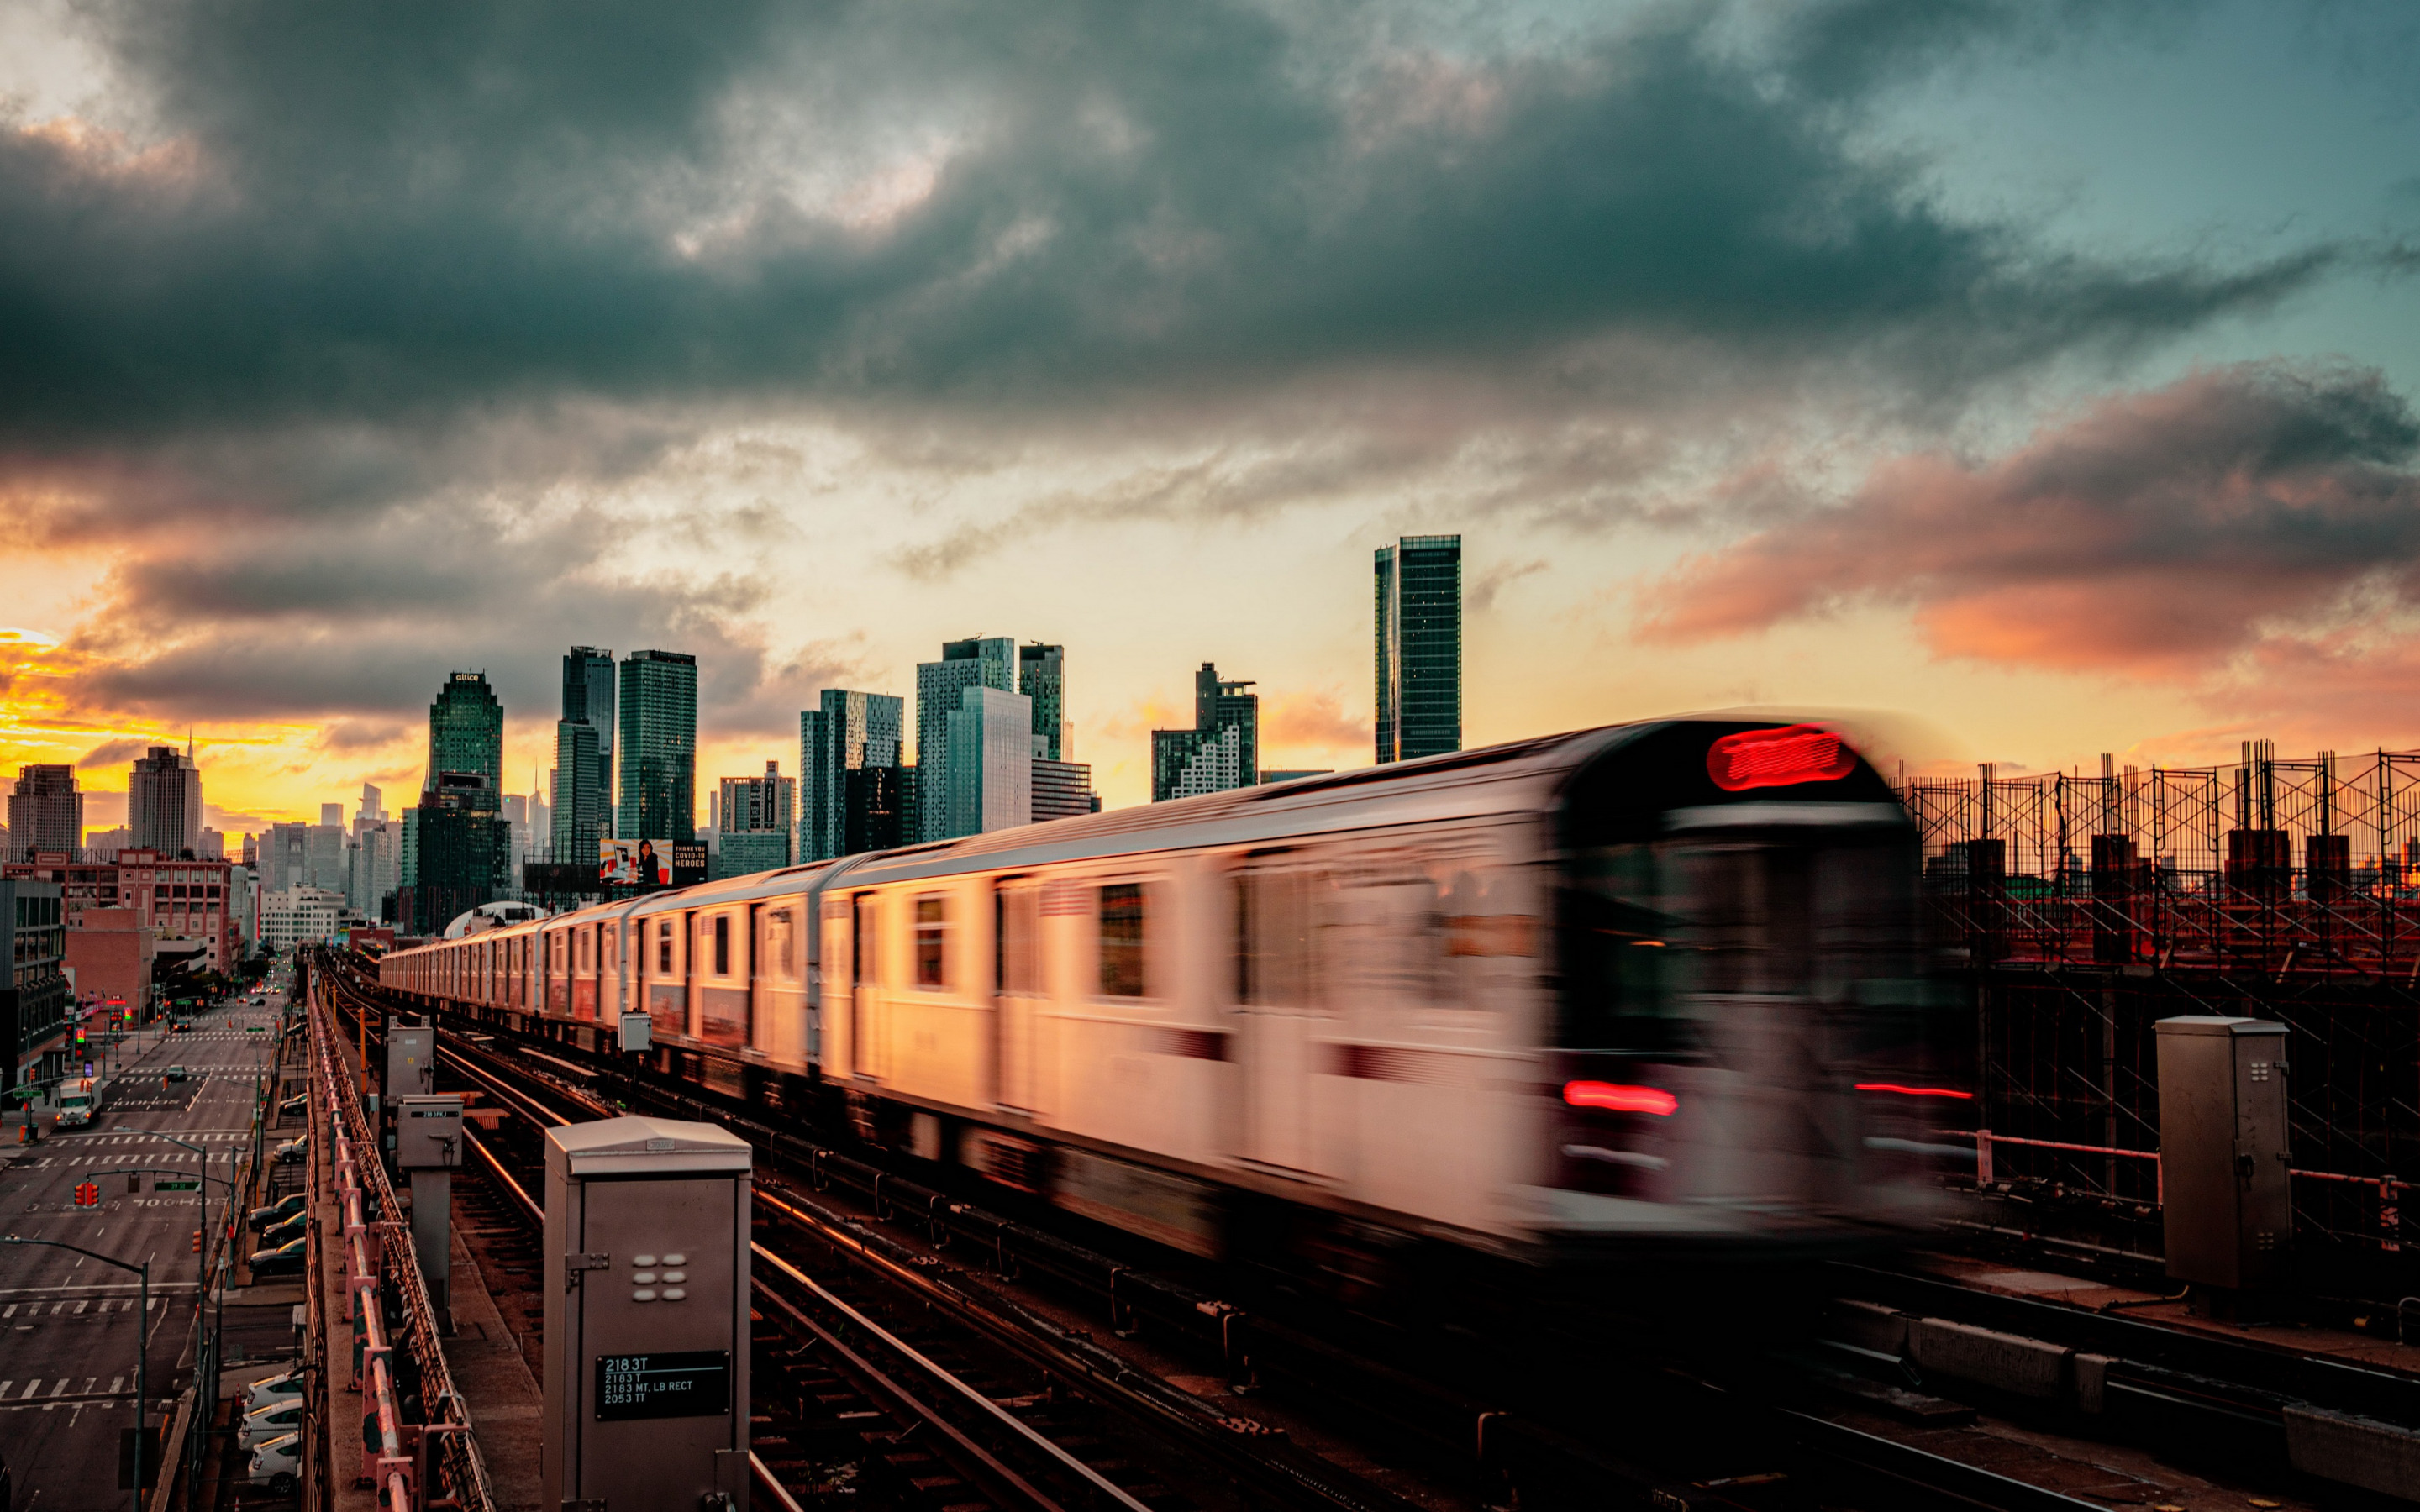 Download wallpaper New York, evening, sunset, New York subway, subway train, skyscrapers, modern buildings, USA for desktop with resolution 2880x1800. High Quality HD picture wallpaper